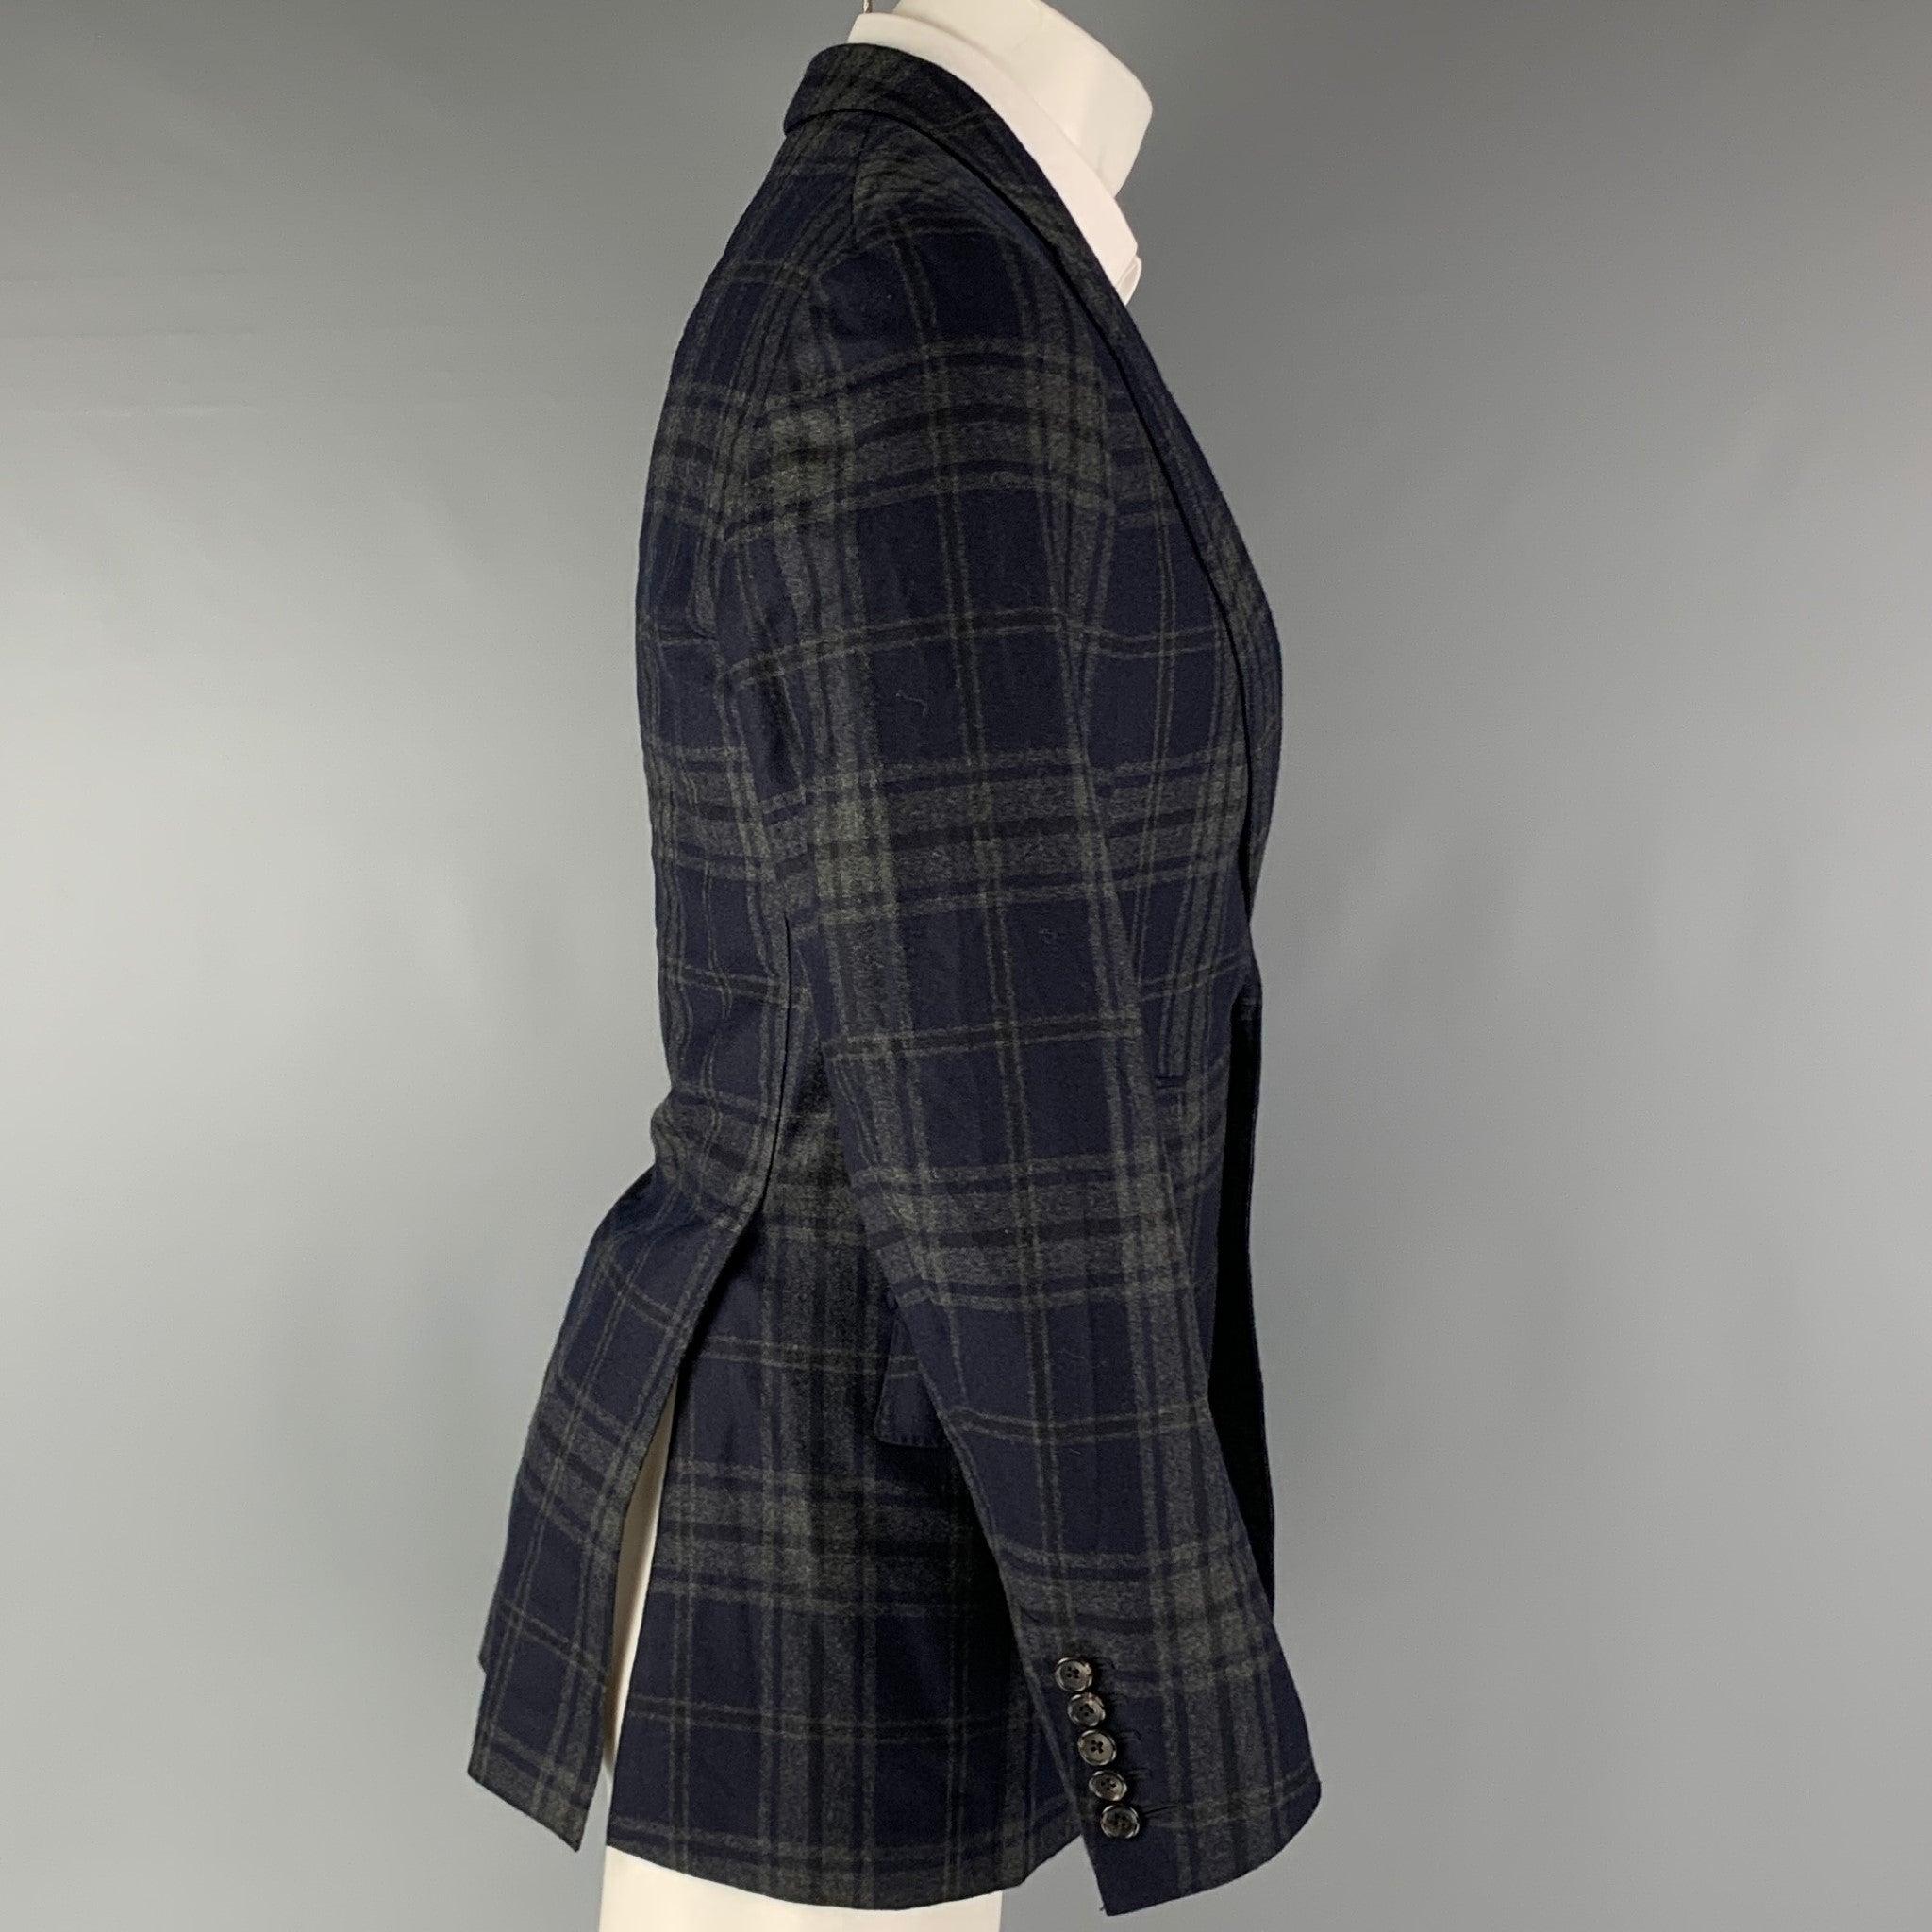 TOM FORD sport coat comes in a navy and grey plaid wool and cashmere woven material with a full liner featuring a peak lapel, flap pockets, double back vent, and a double button closure. Excellent Pre-Owned Condition. 

Marked:   46 R